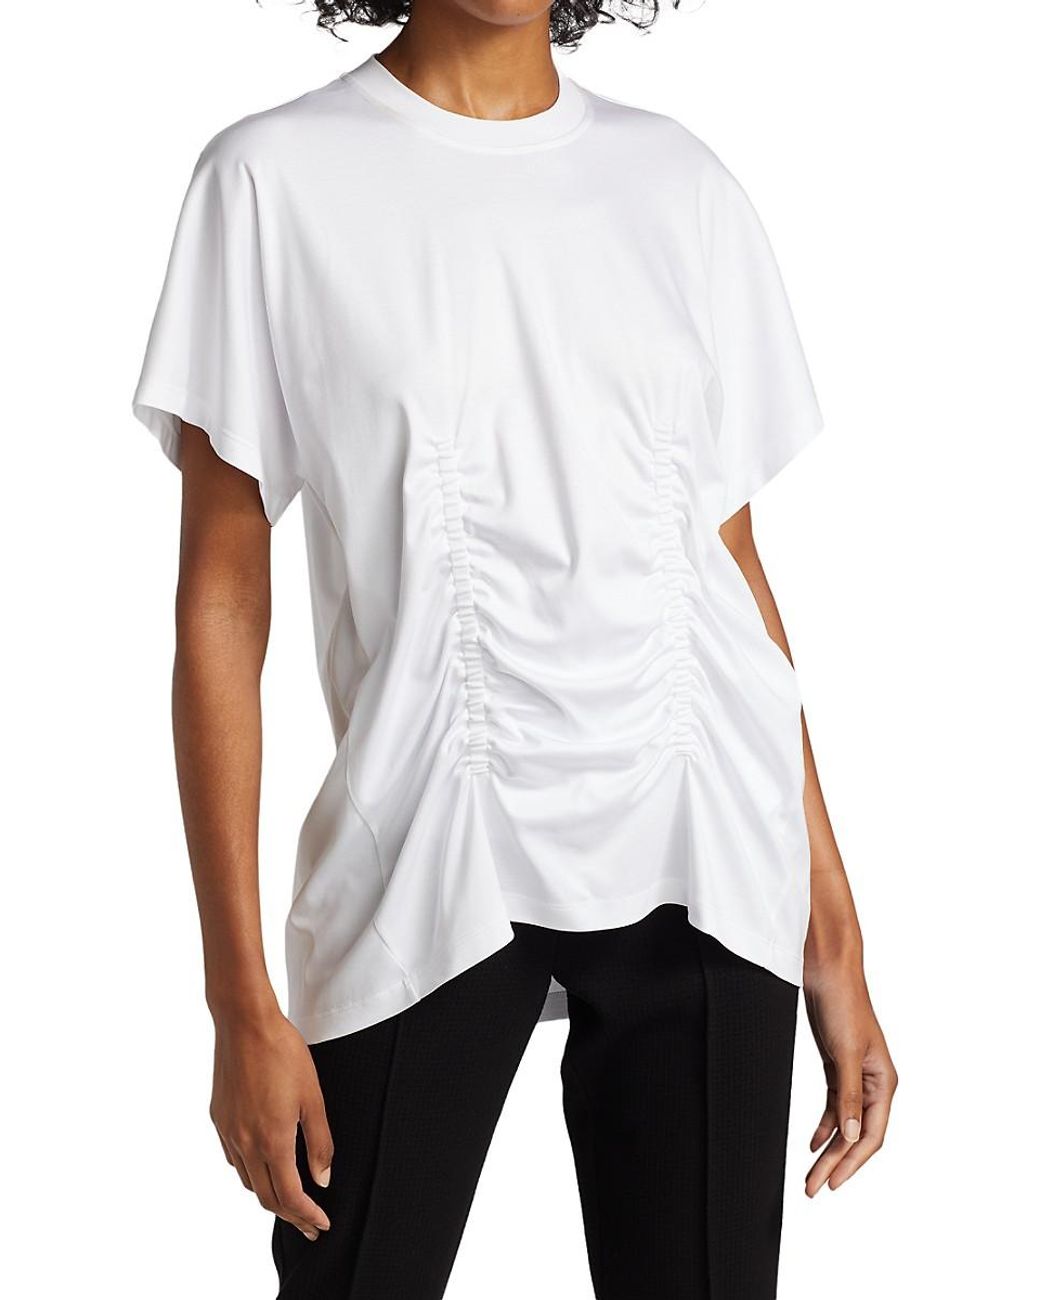 Sportmax Jerener Gathered T-shirt in White | Lyst Canada